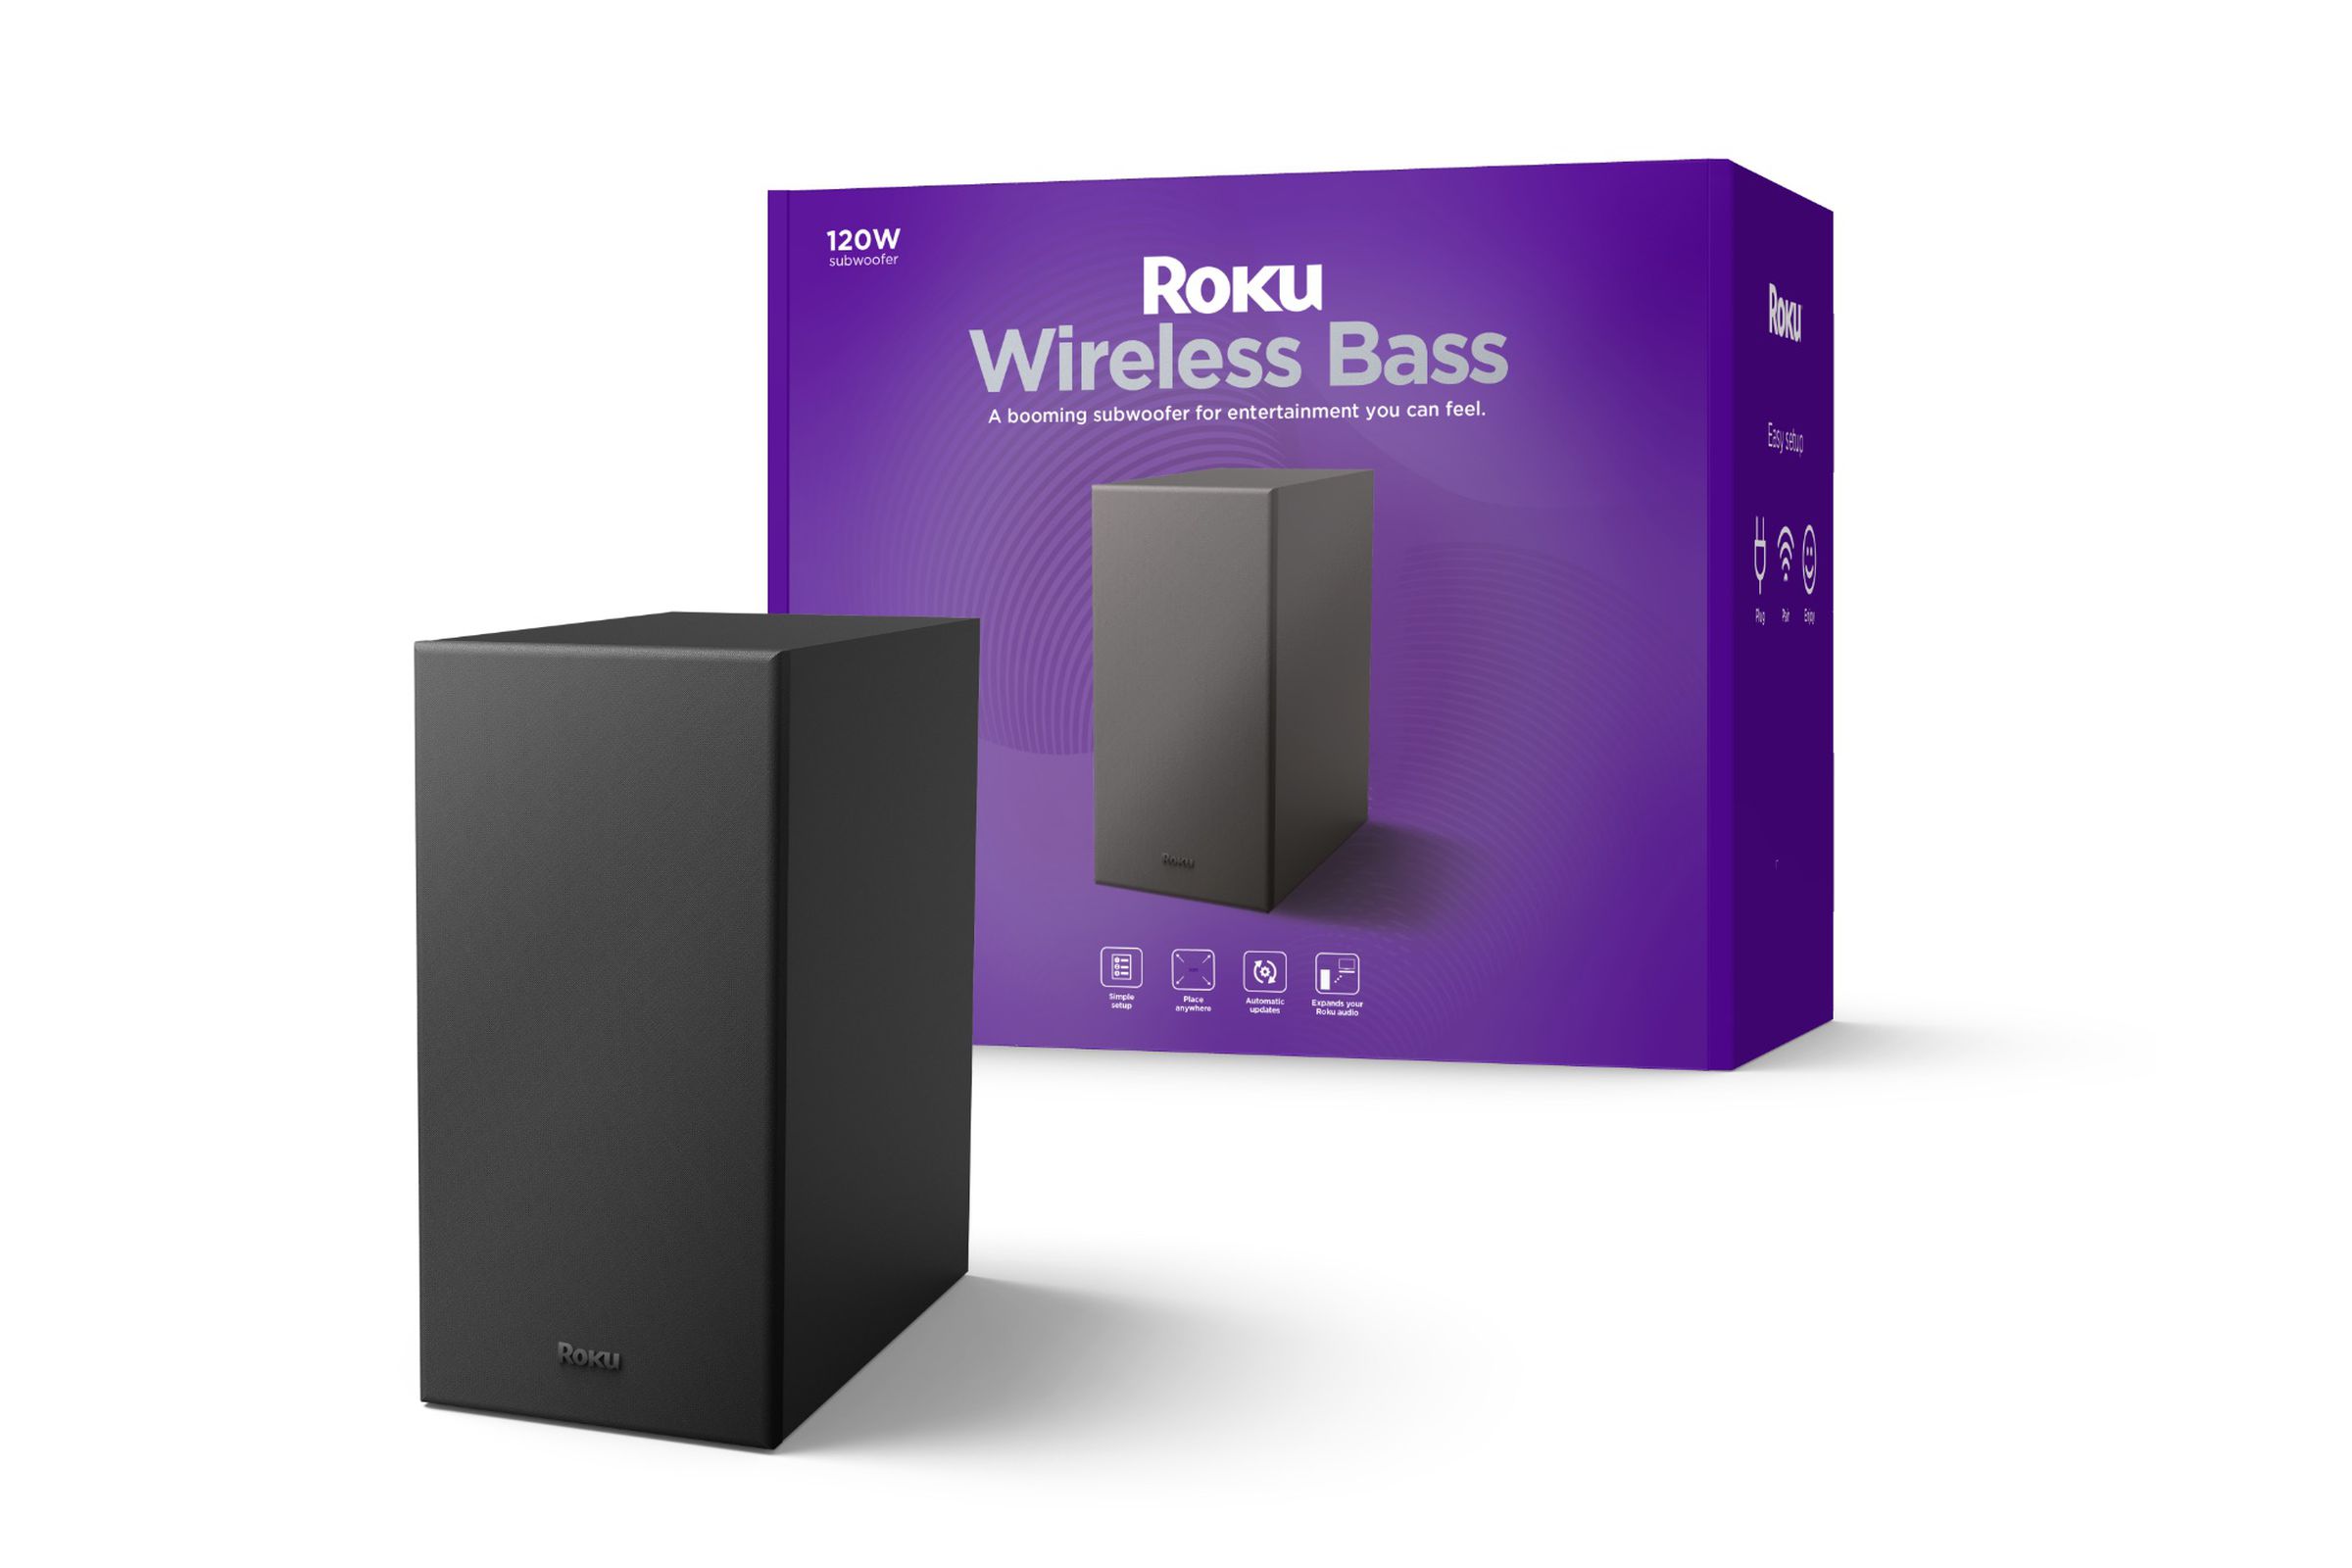 An image of the Roku Wireless Bass subwoofer and its packaging.